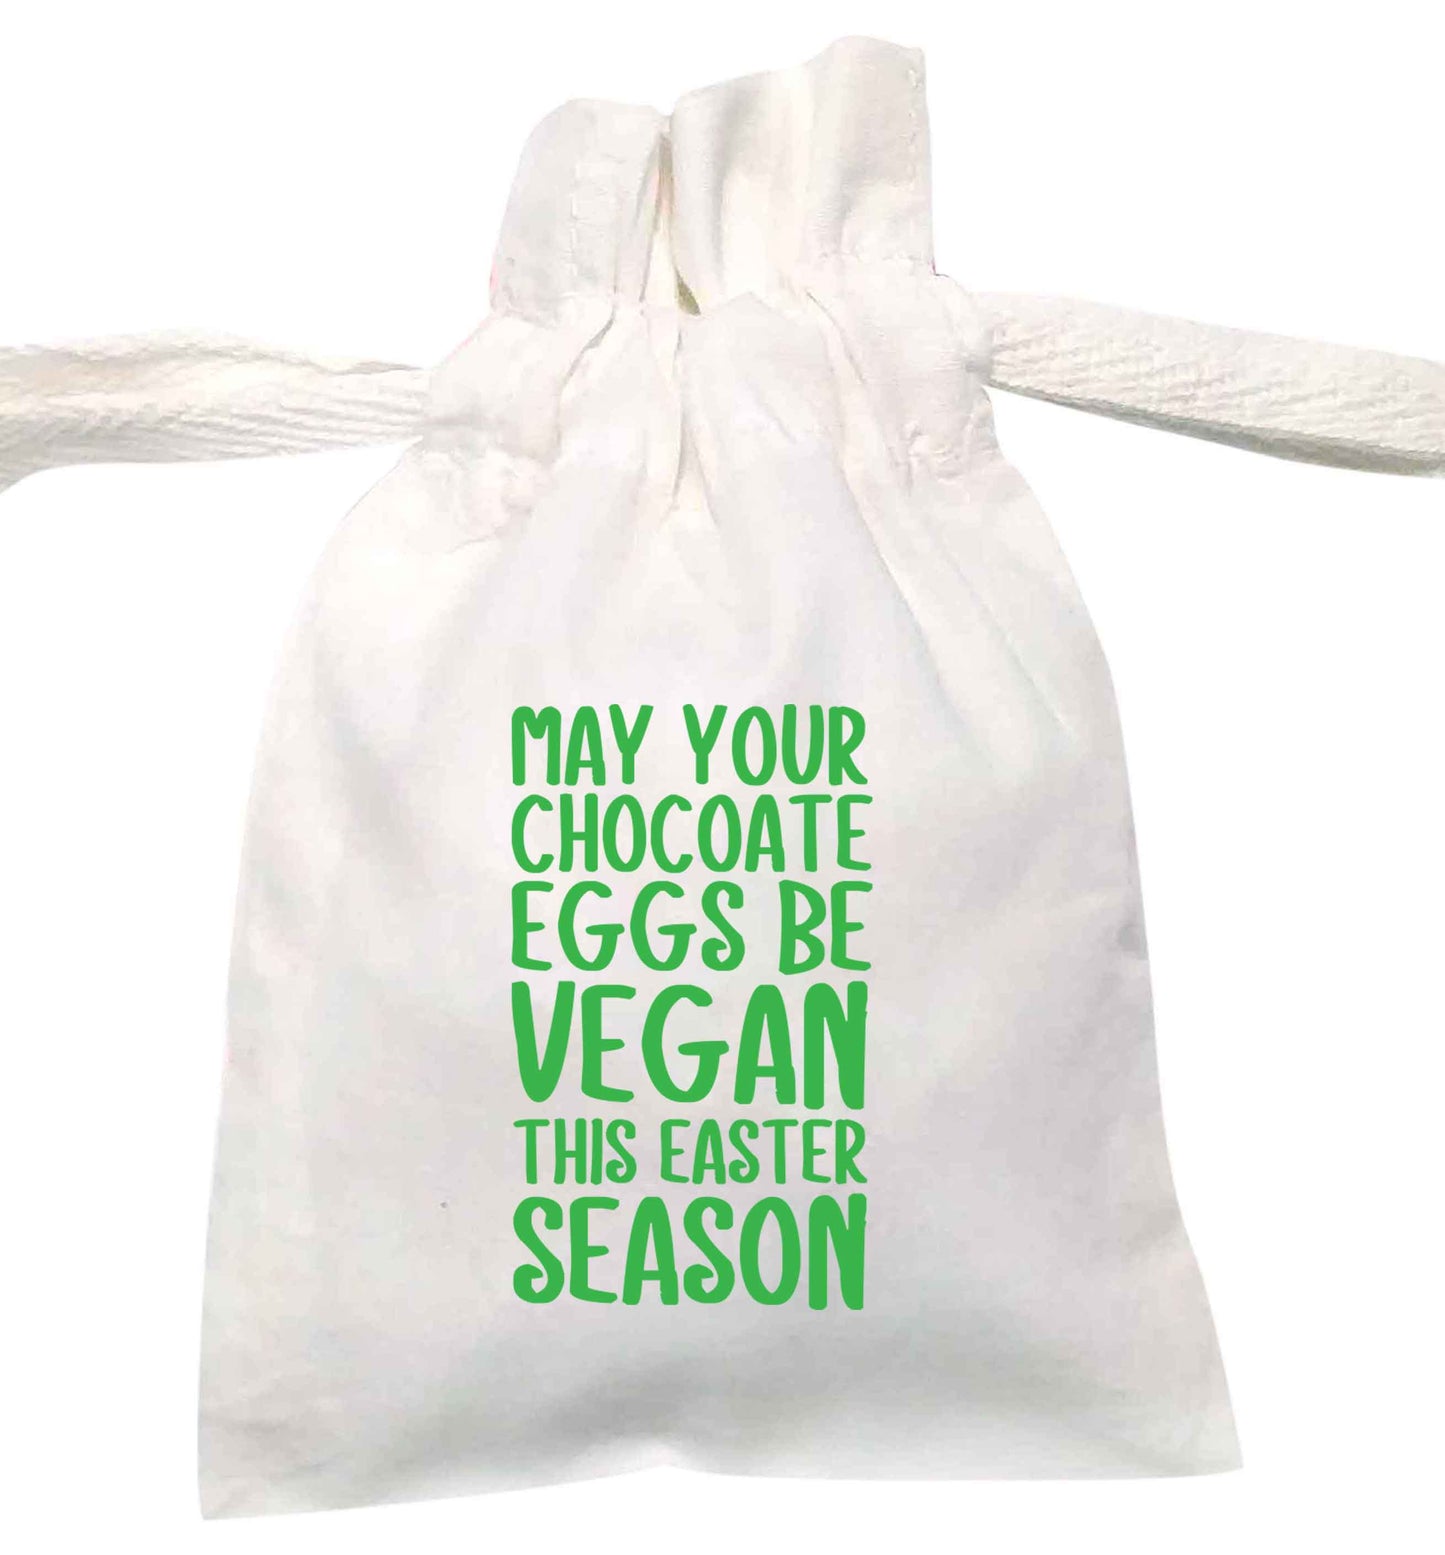 May your chocolate eggs be vegan this Easter season | XS - L | Pouch / Drawstring bag / Sack | Organic Cotton | Bulk discounts available!